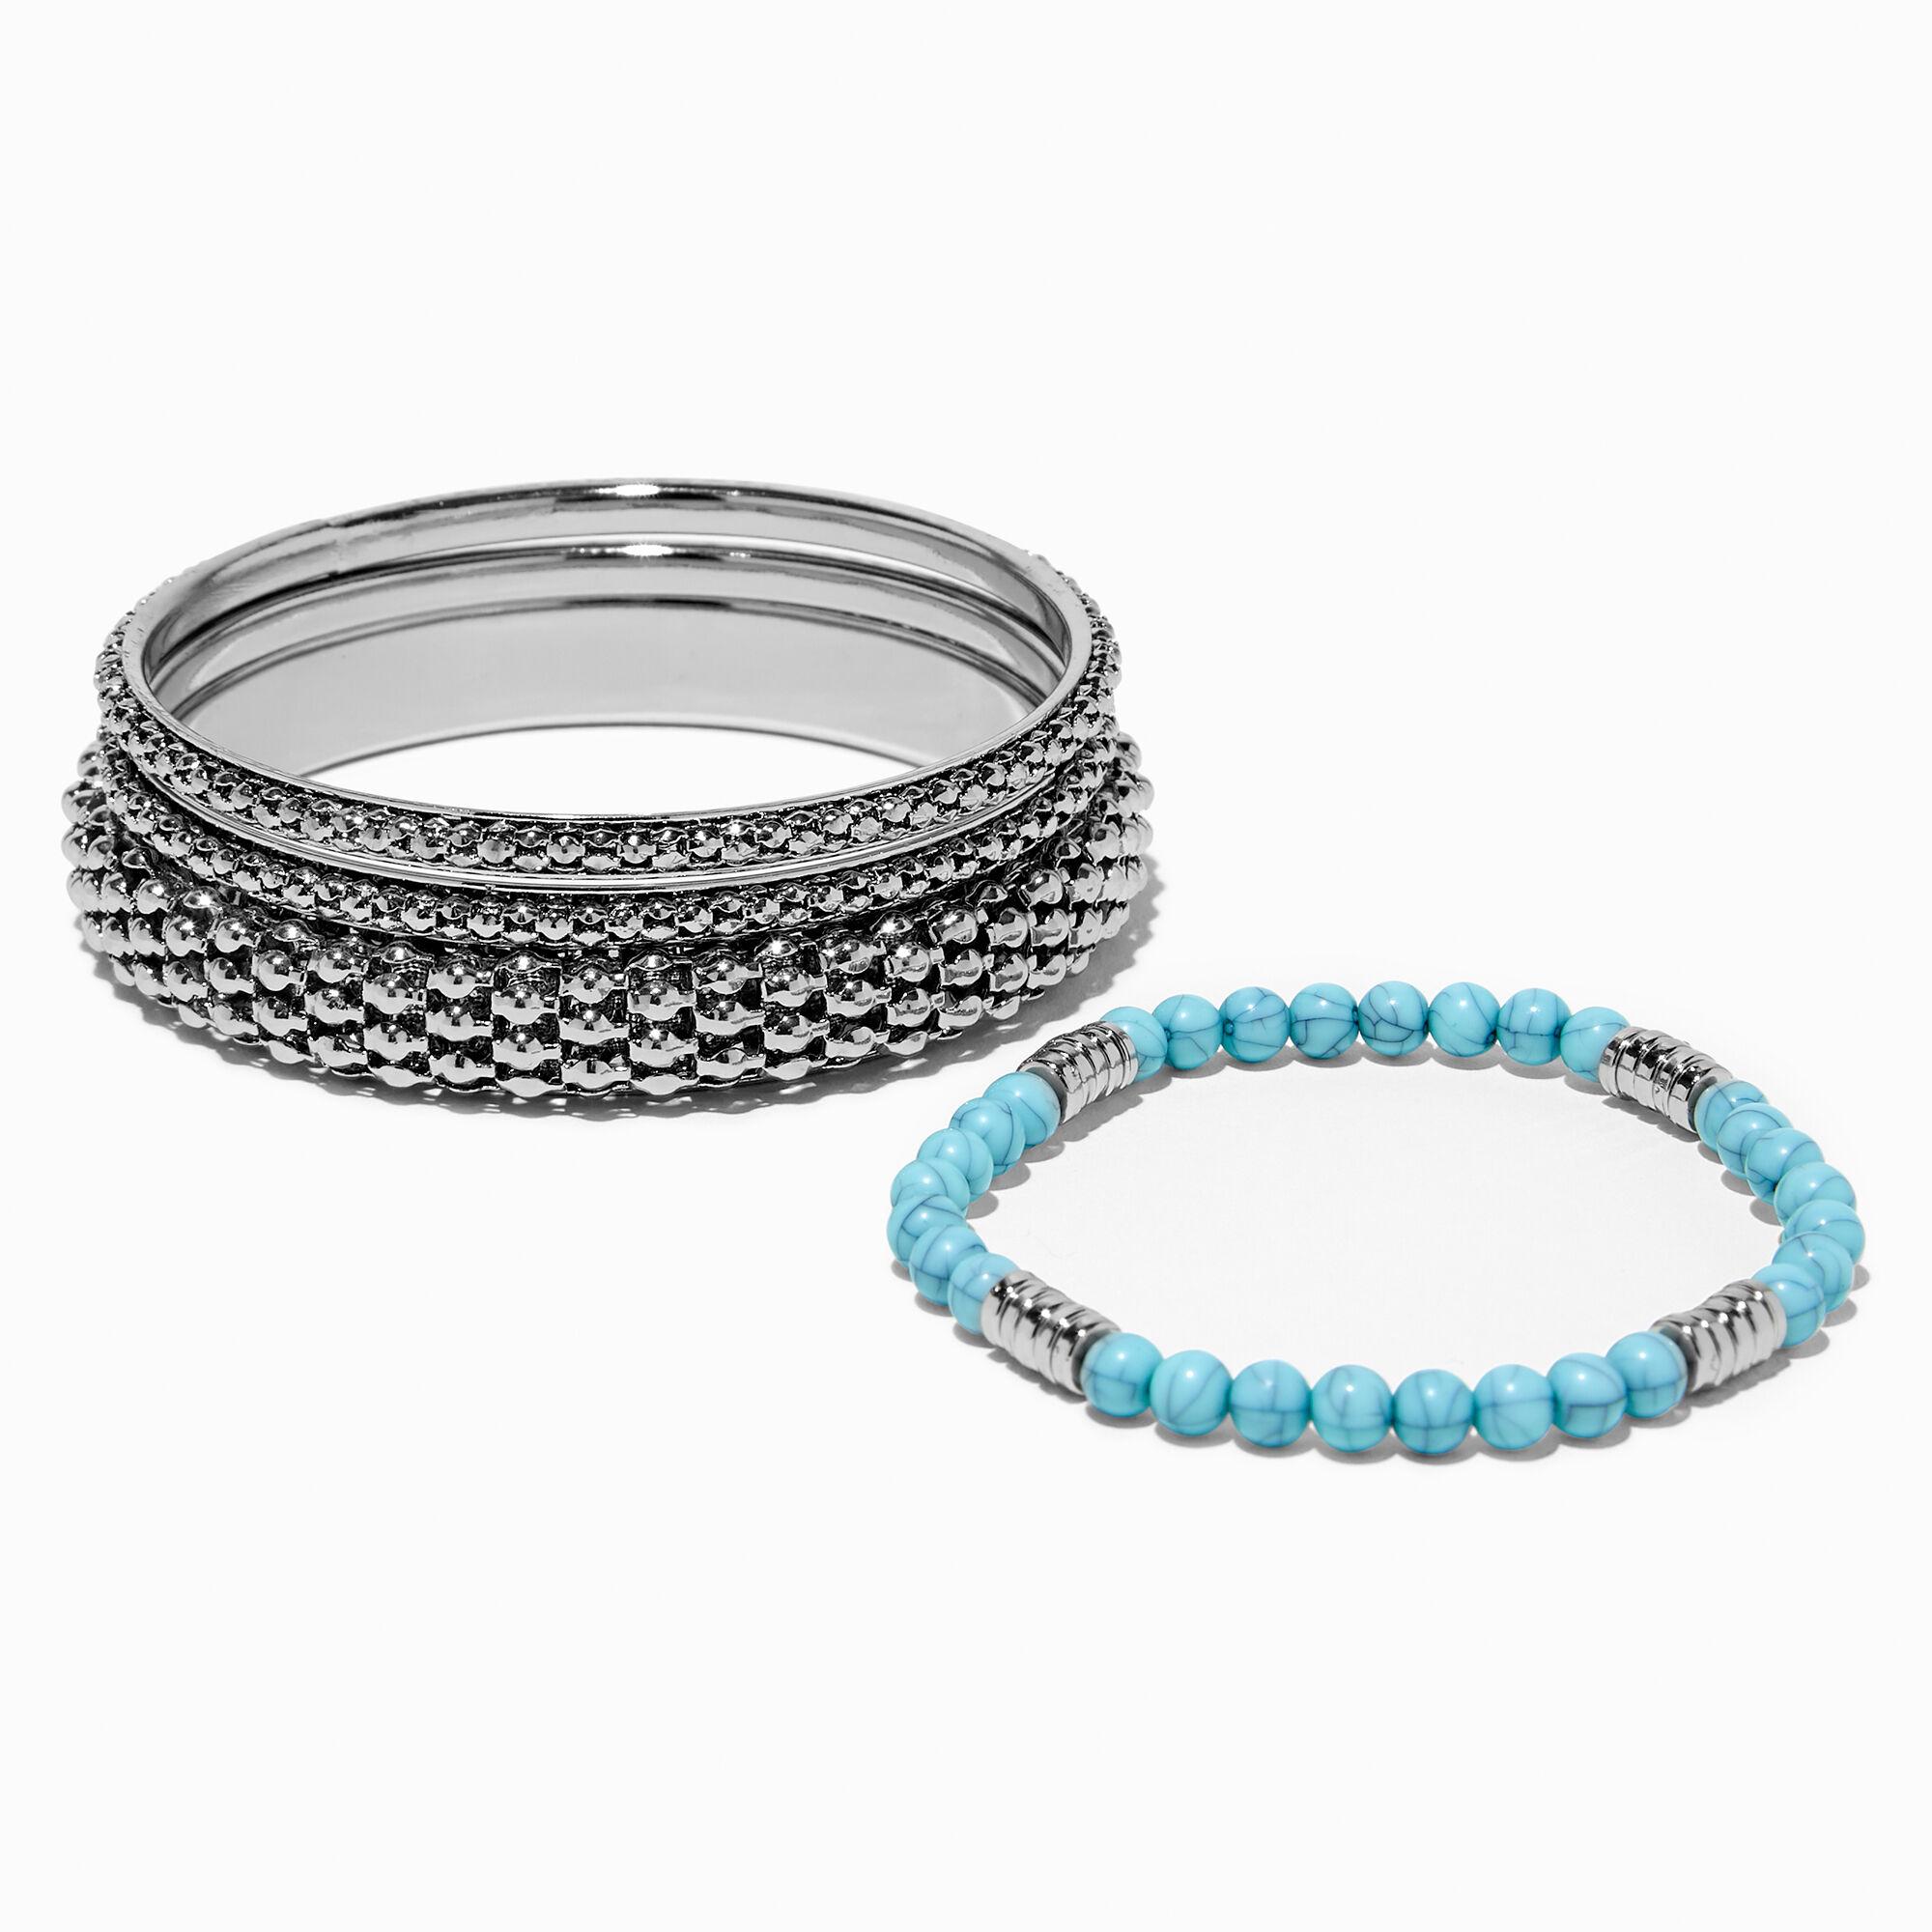 View Claires SilverTone Bangle Beaded Bracelet Set 4 Pack Turquoise information